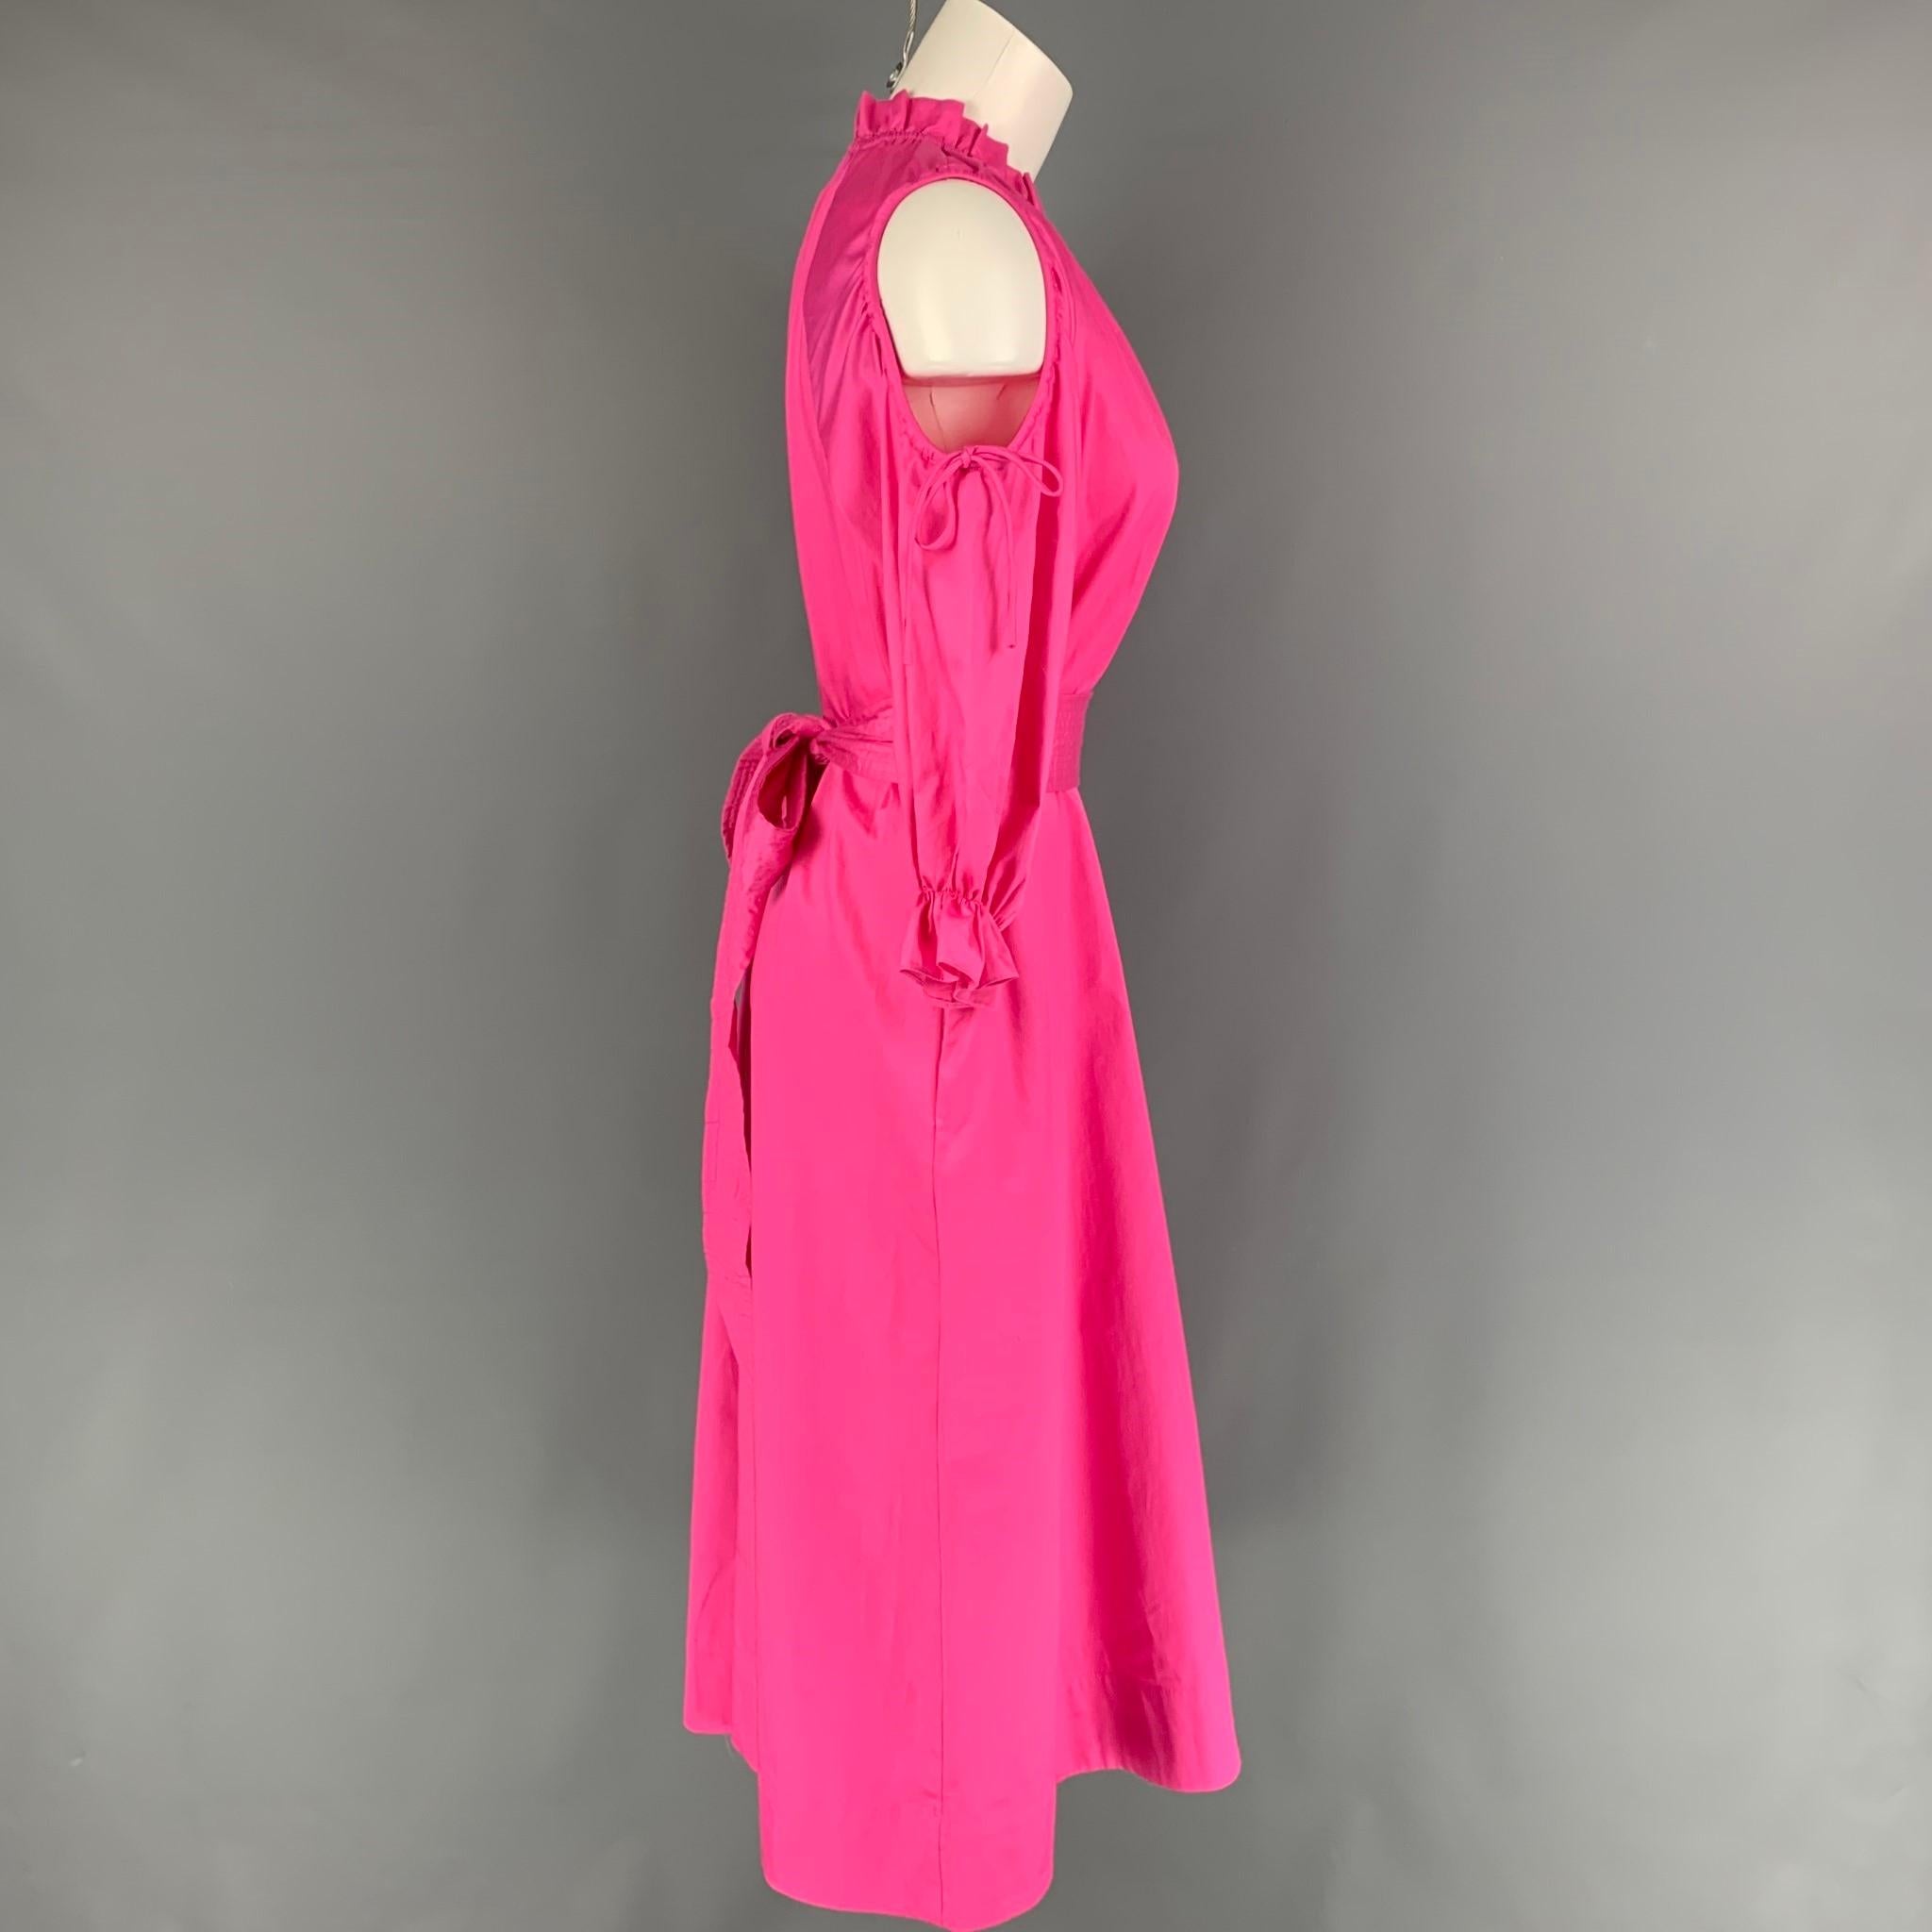 CYNTHIA ROWLEY dress comes in a pink cotton featuring cutout shoulder details, ruffled neckline, elastic sleeves, slit pockets, and a belted detail. 

Very Good Pre-Owned Condition.
Marked: XS
Original Retail Price: $395.00

Measurements:

Shoulder: